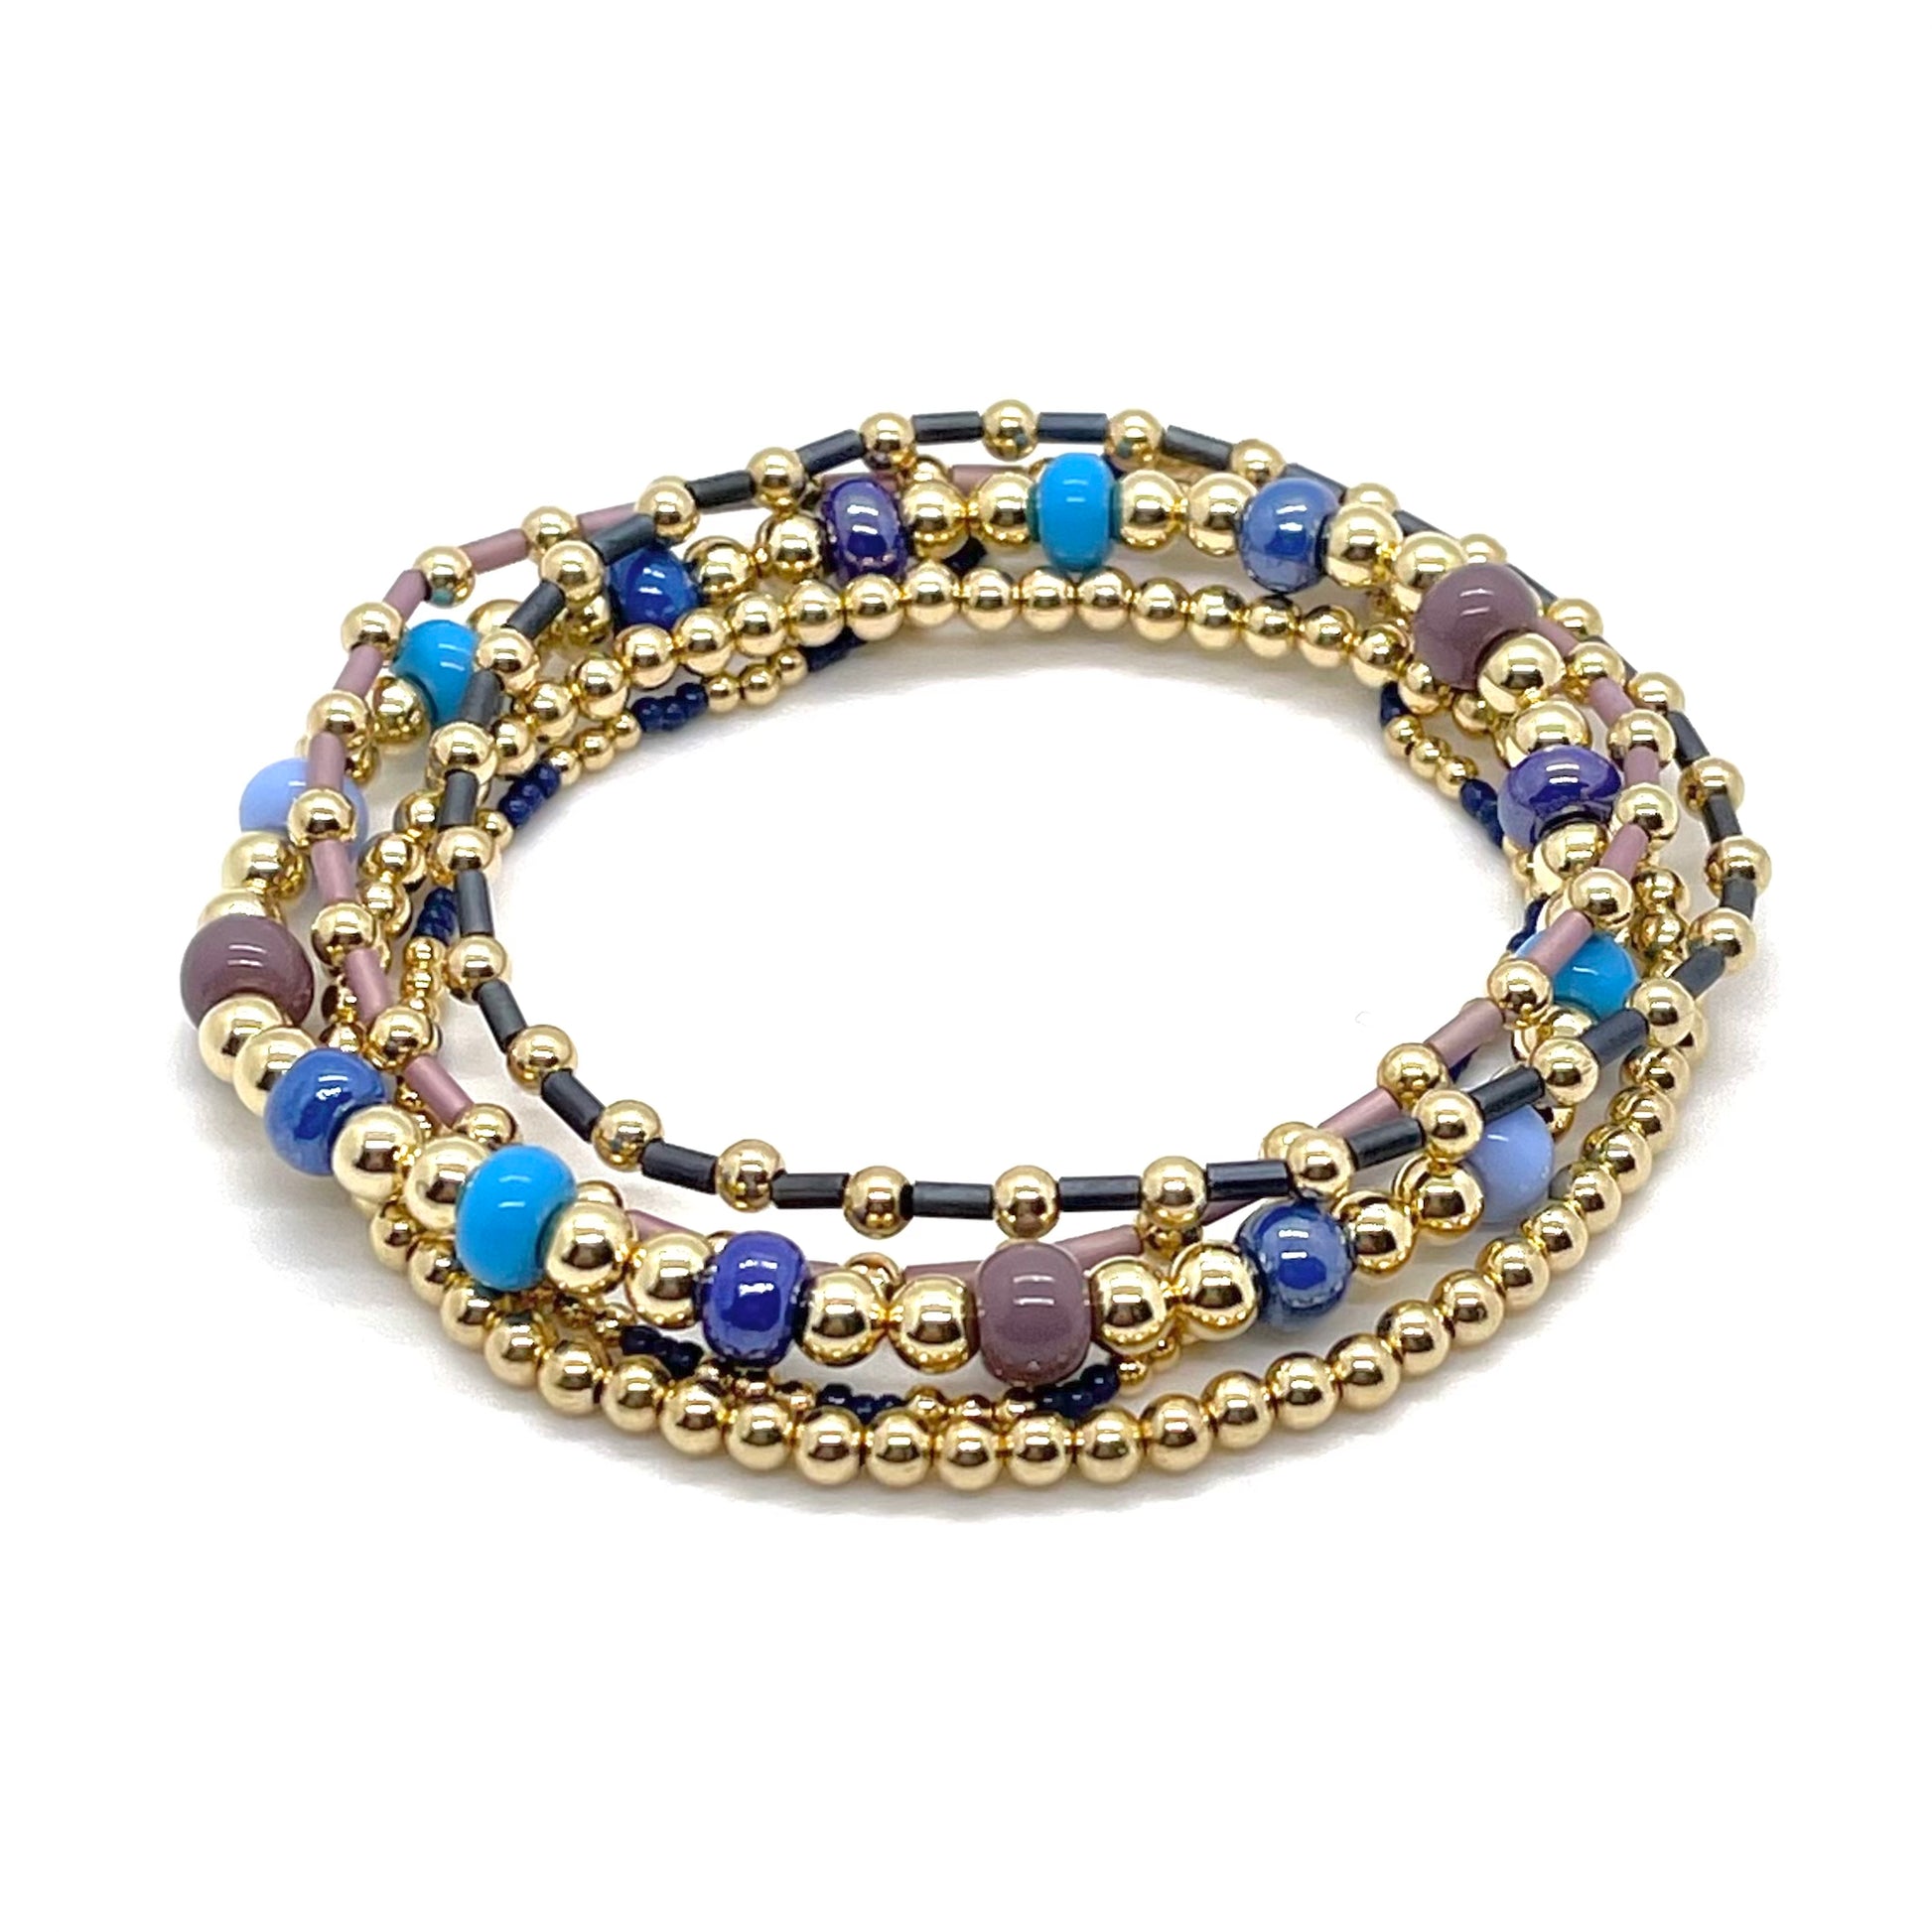 Summer gold bead bracelet stack with blue and mauve glass seed beads on stretch cord.